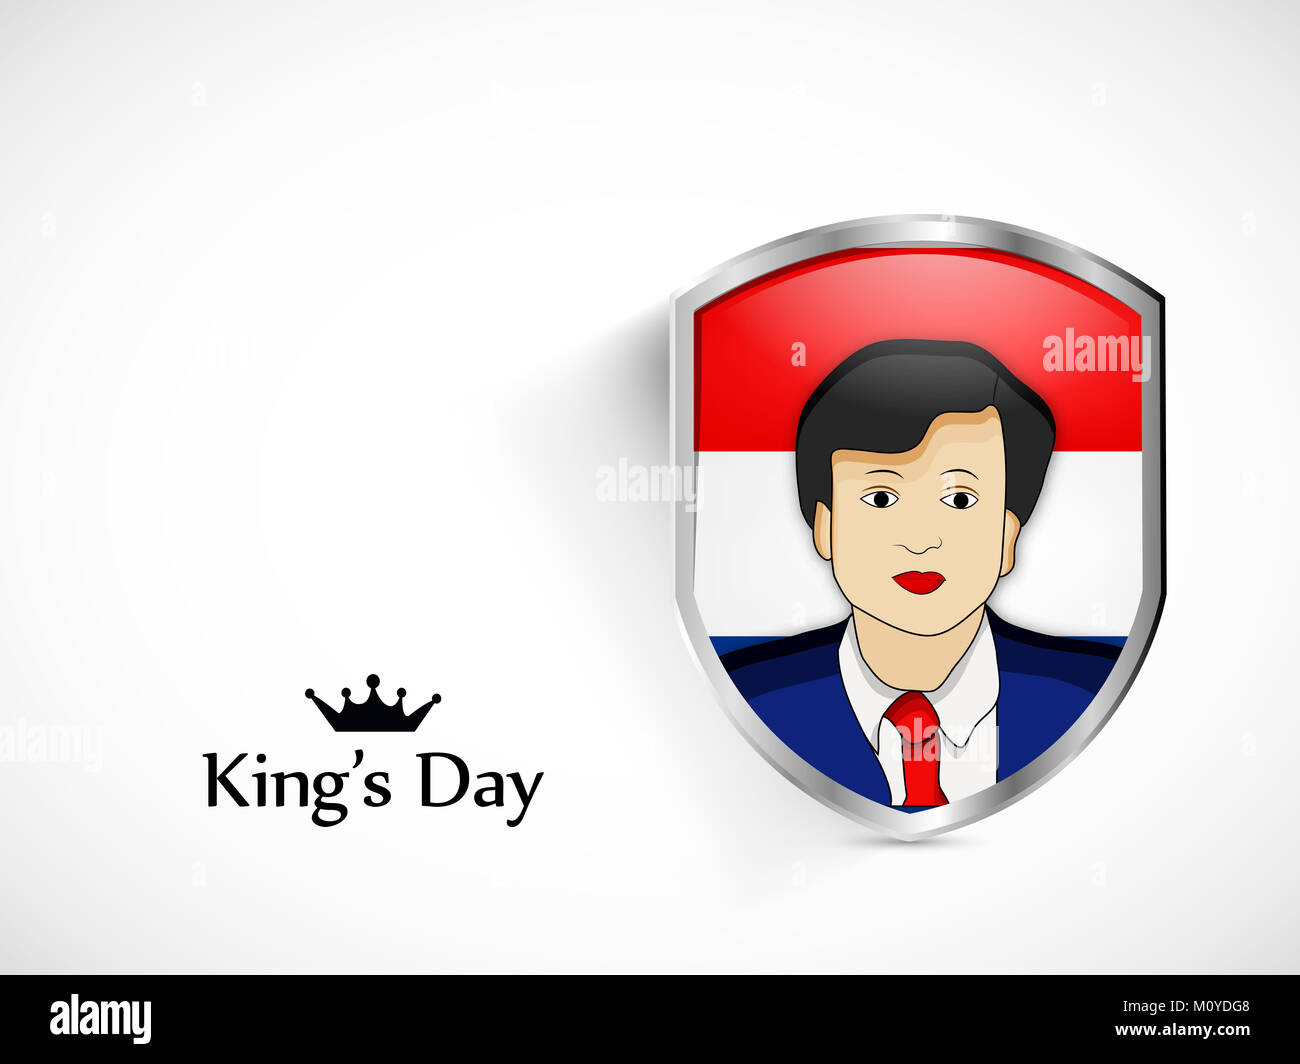 illustration of koningsdag or kings day background. Kings Day is a national holiday in the Kingdom of the Netherlands. Celebrated on 27 April. Stock Photo